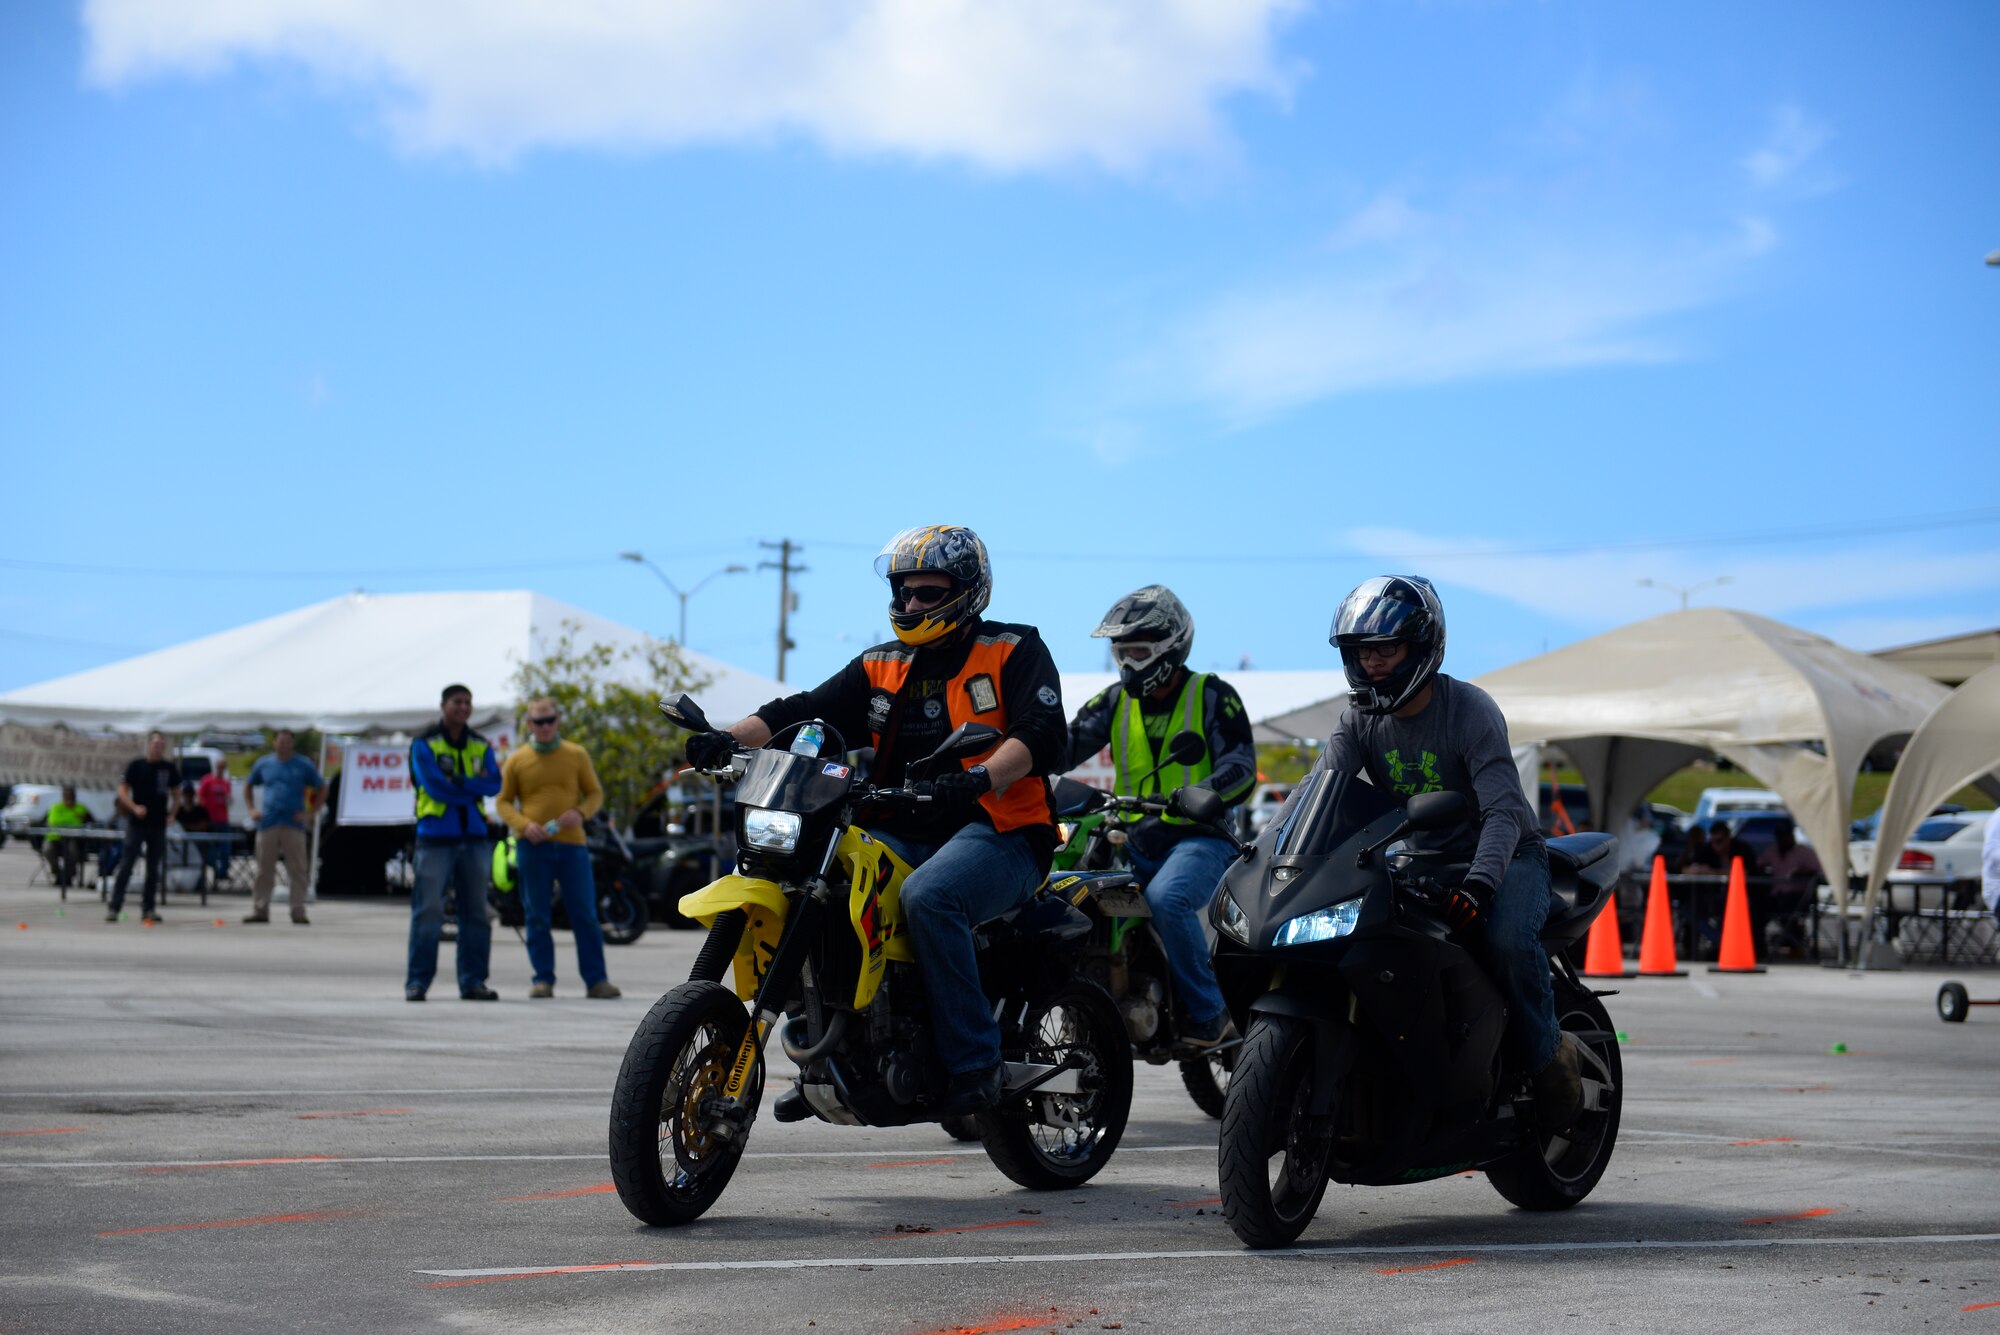 Riders compete during a slow-ride challenge Nov. 6, 2015, at Naval Base Guam. Military motorcyclists and family members practiced safe riding techniques, to include controlling their vehicle with throttle control, during a motorcycle mentorship day. (U.S. Air Force photo by Staff Sgt. Alexander W. Riedel/Released)